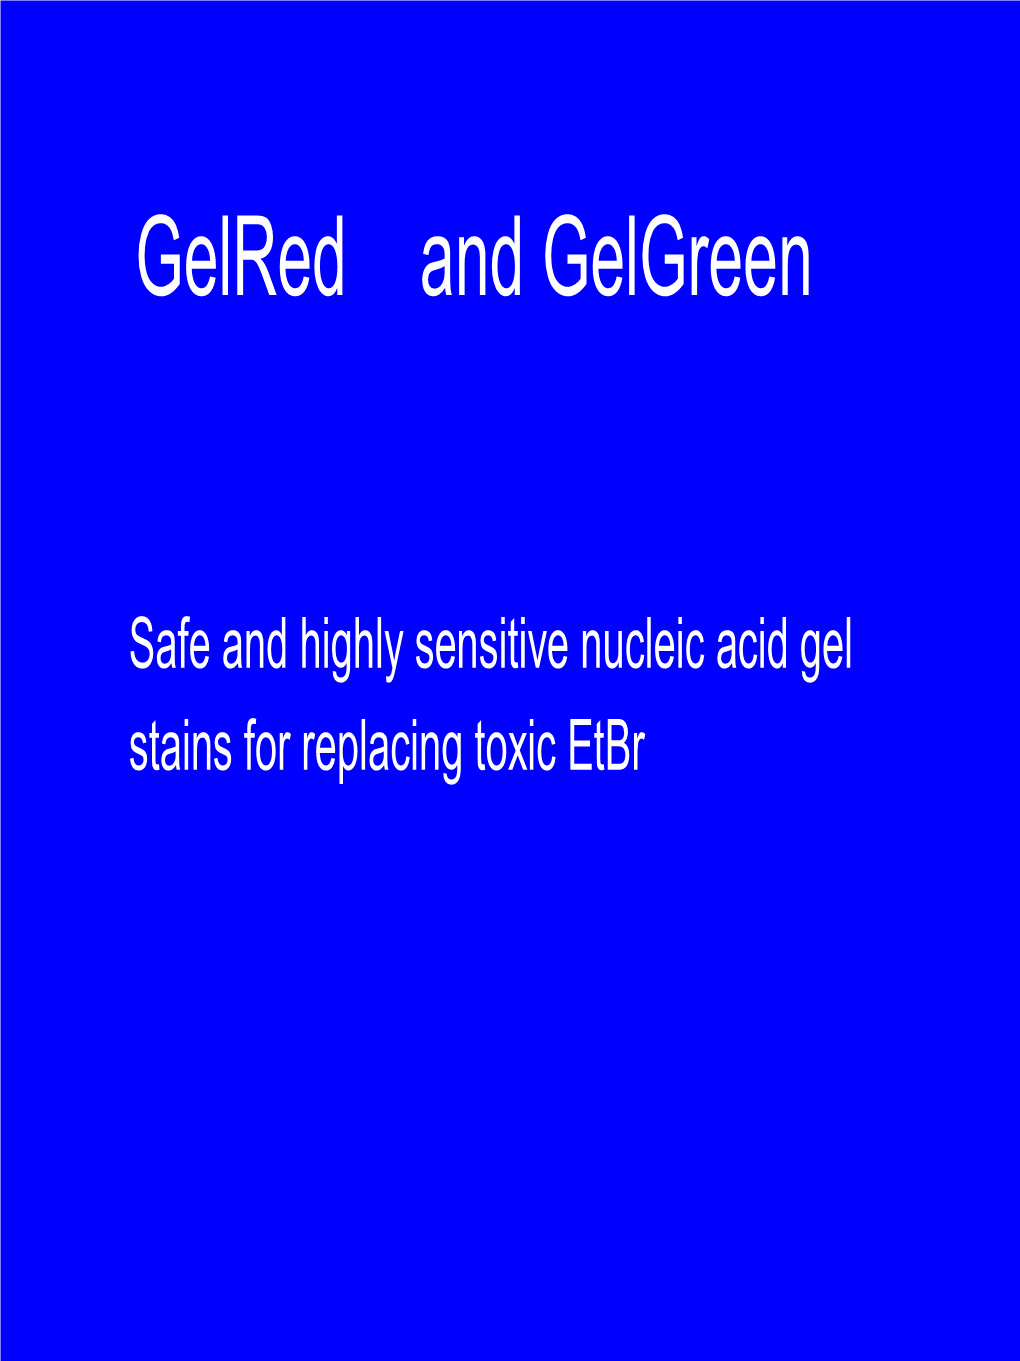 Gelred and Gelgreen